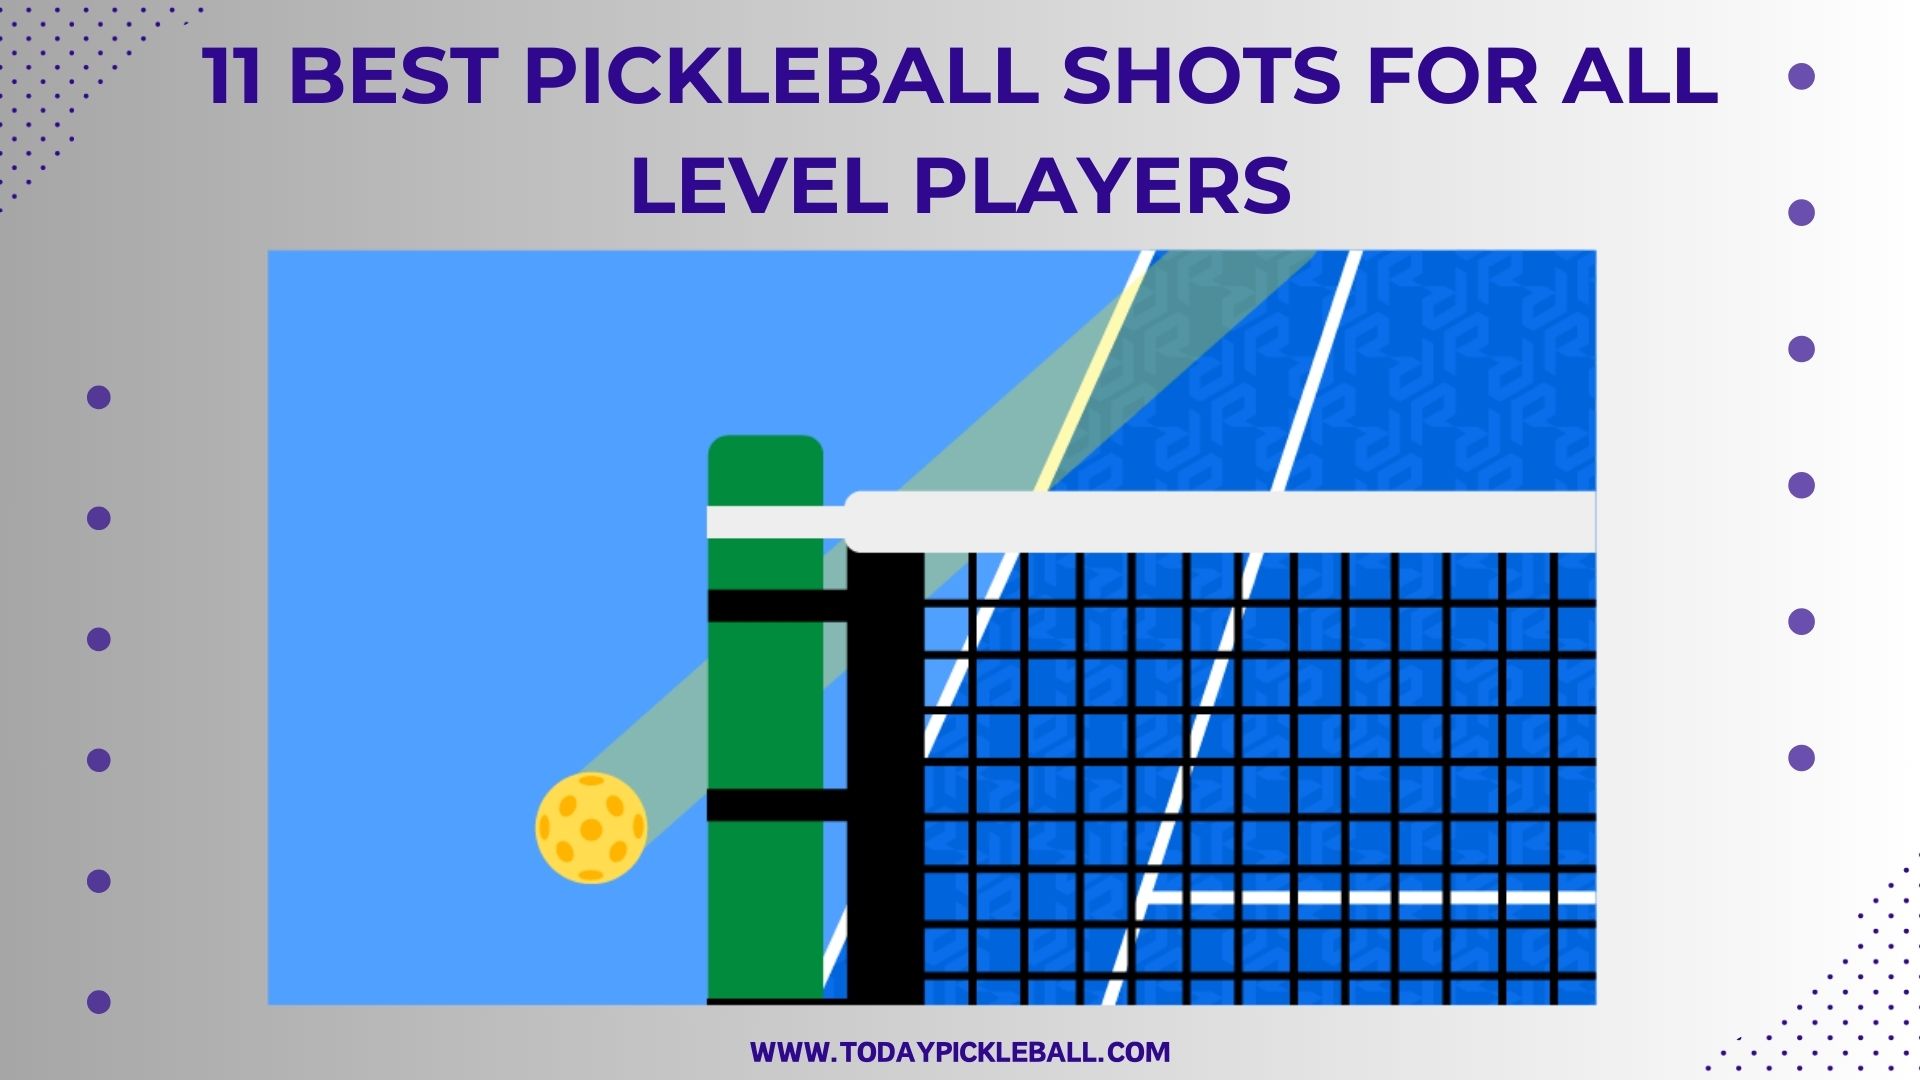 here is the image of pickleball balls to guide you about the Best Pickleball Shots